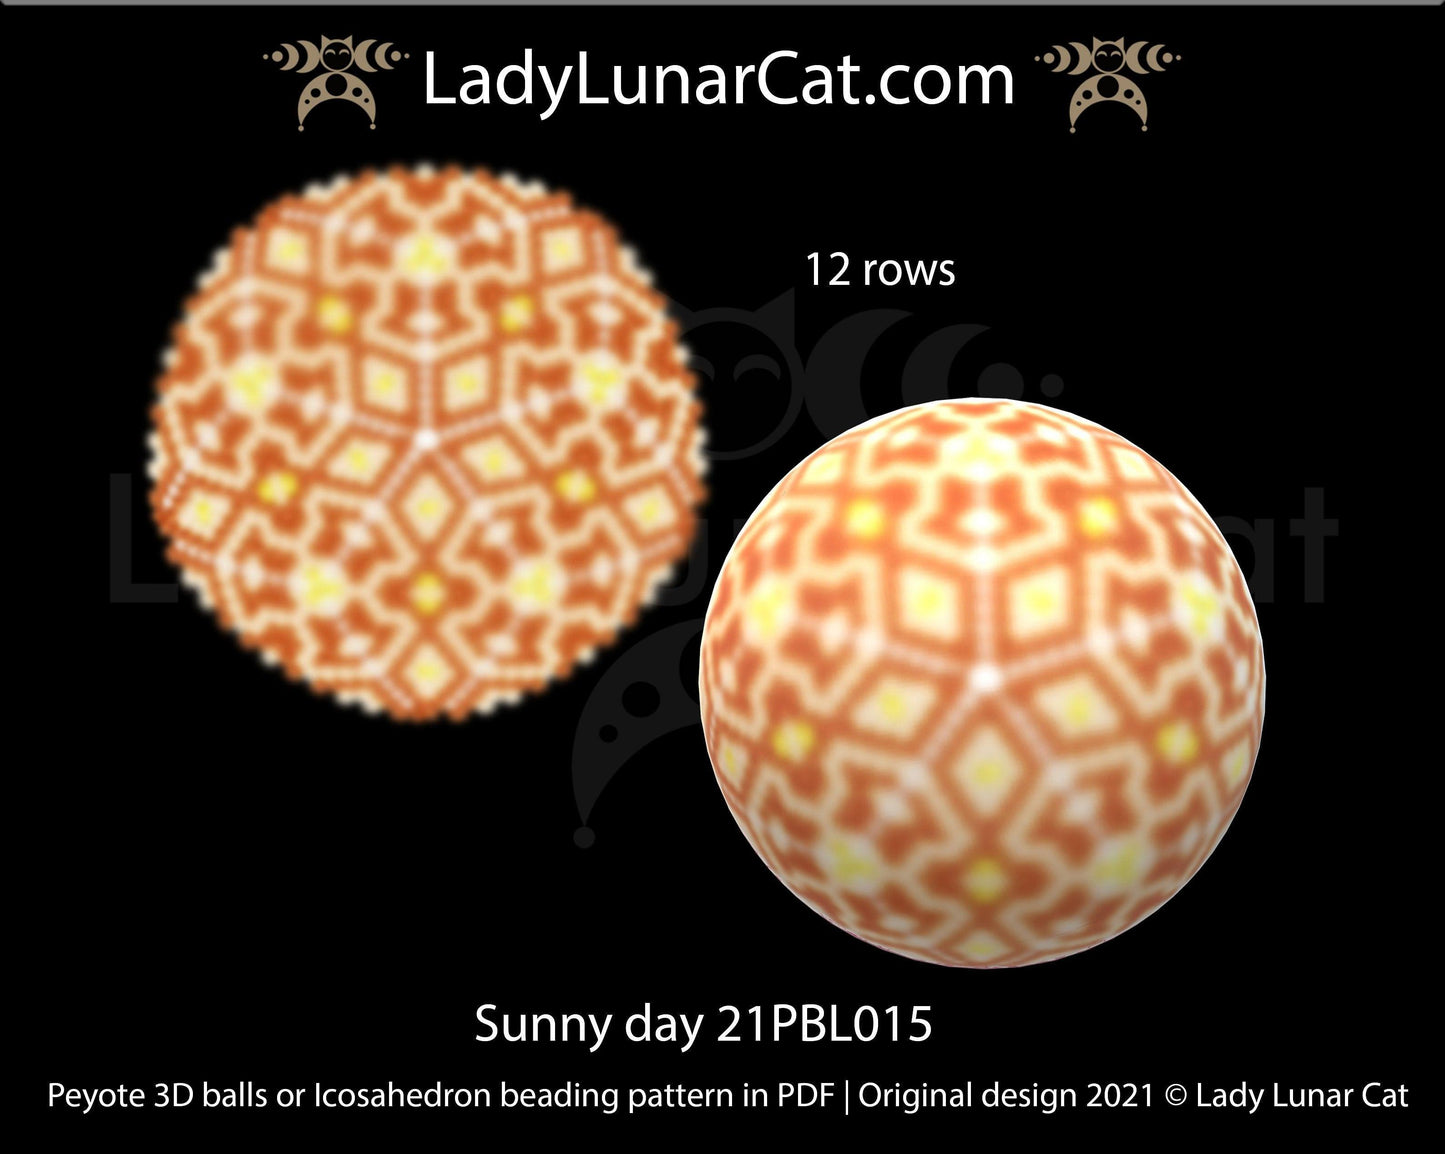 Copy of Peyote 3d ball pattern for beading | Beaded Icosahedron Sunny day 21PBL015 12 rows LadyLunarCat